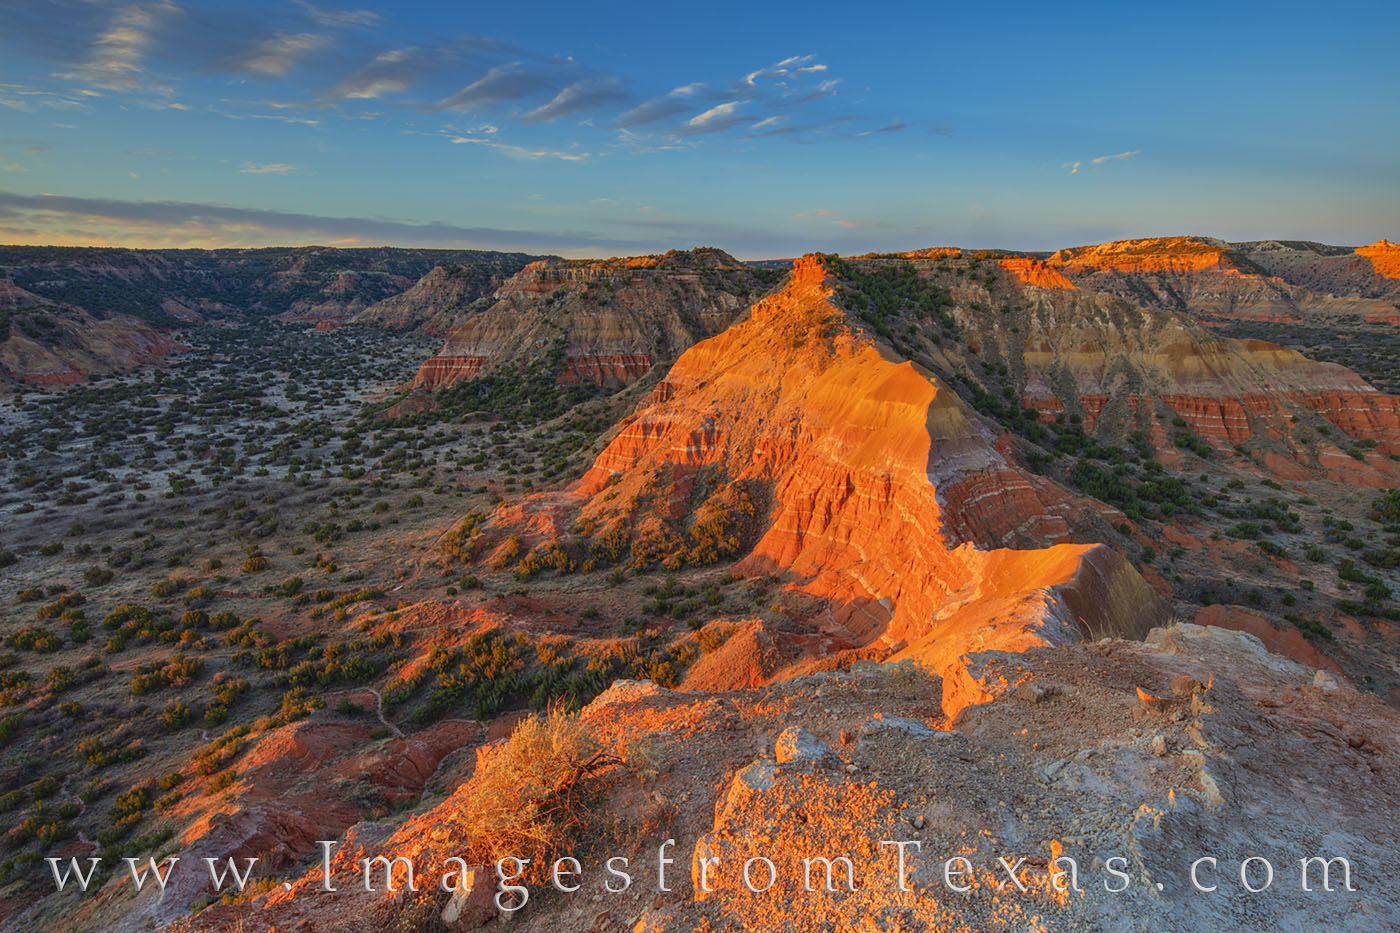 The first light of day shines on the orange rock of Palo Duro Canyon in this view from the summit of Capitol Peak.